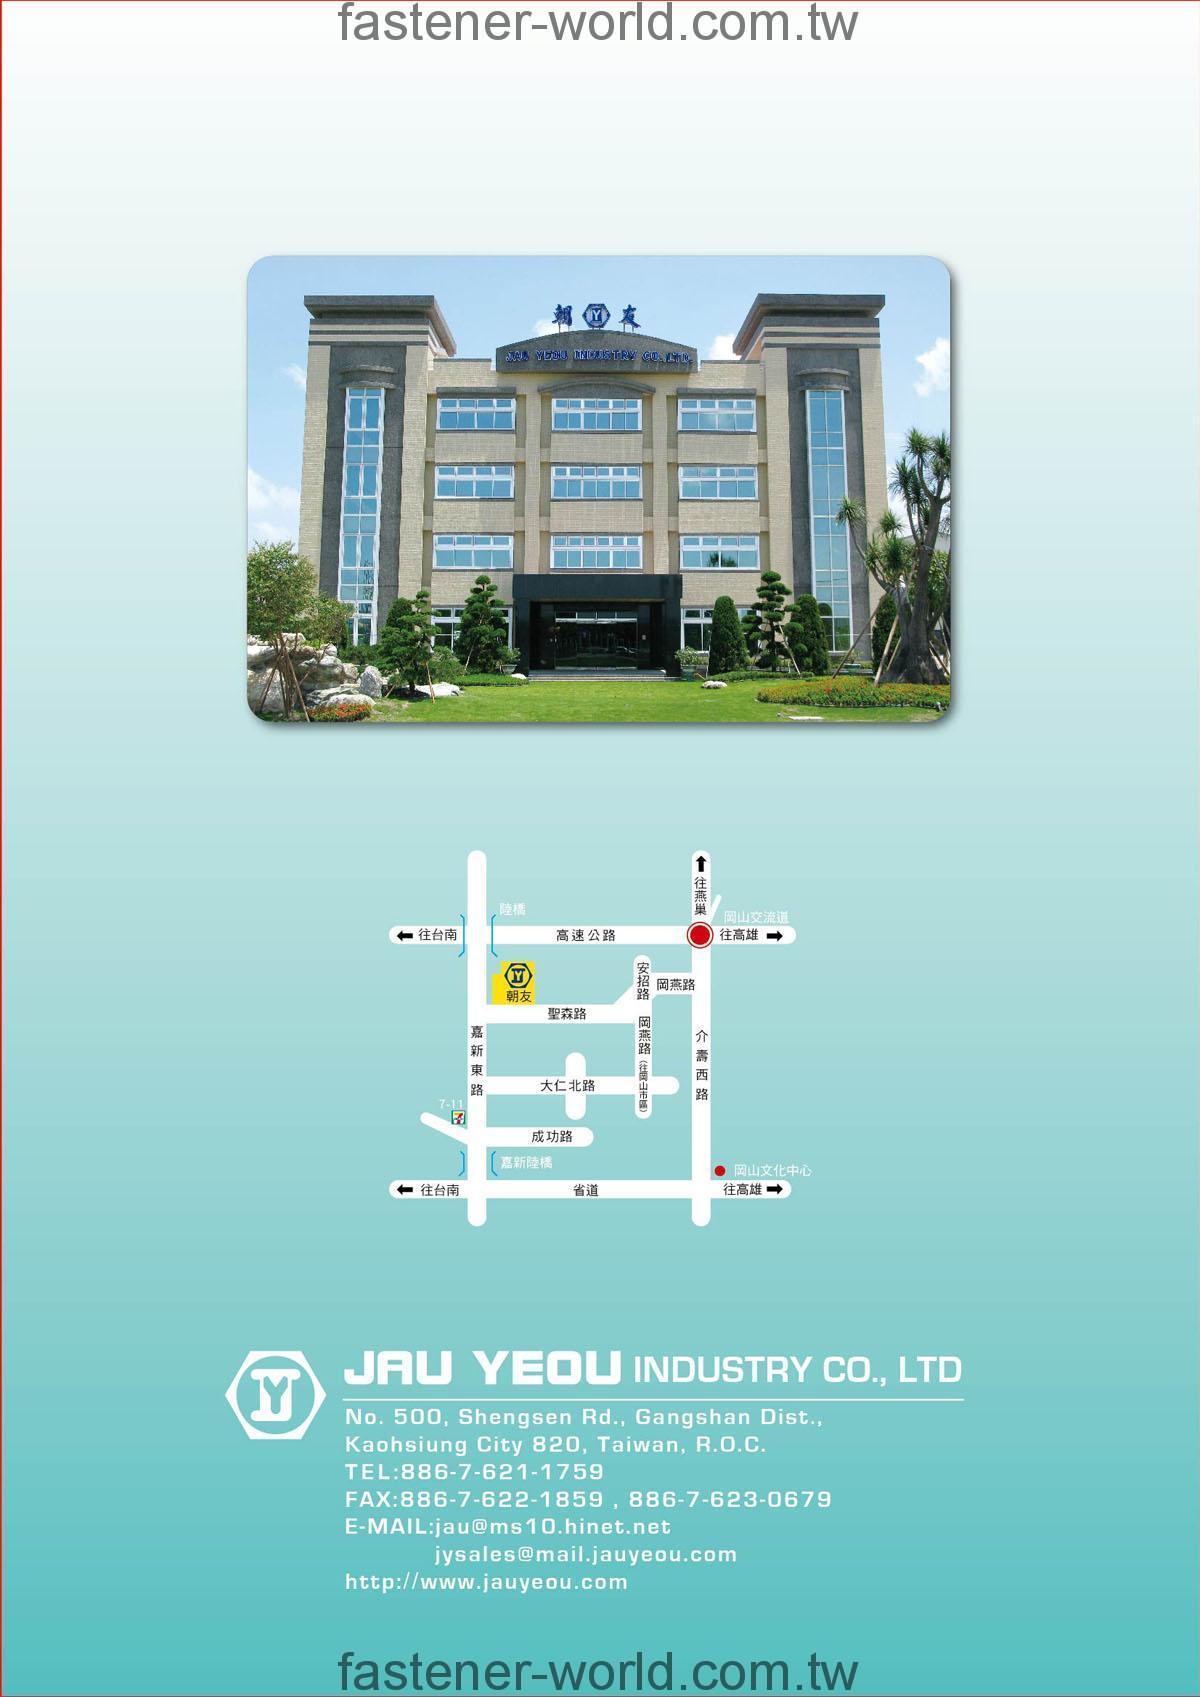 JAU YEOU INDUSTRY CO., LTD. Online Catalogues